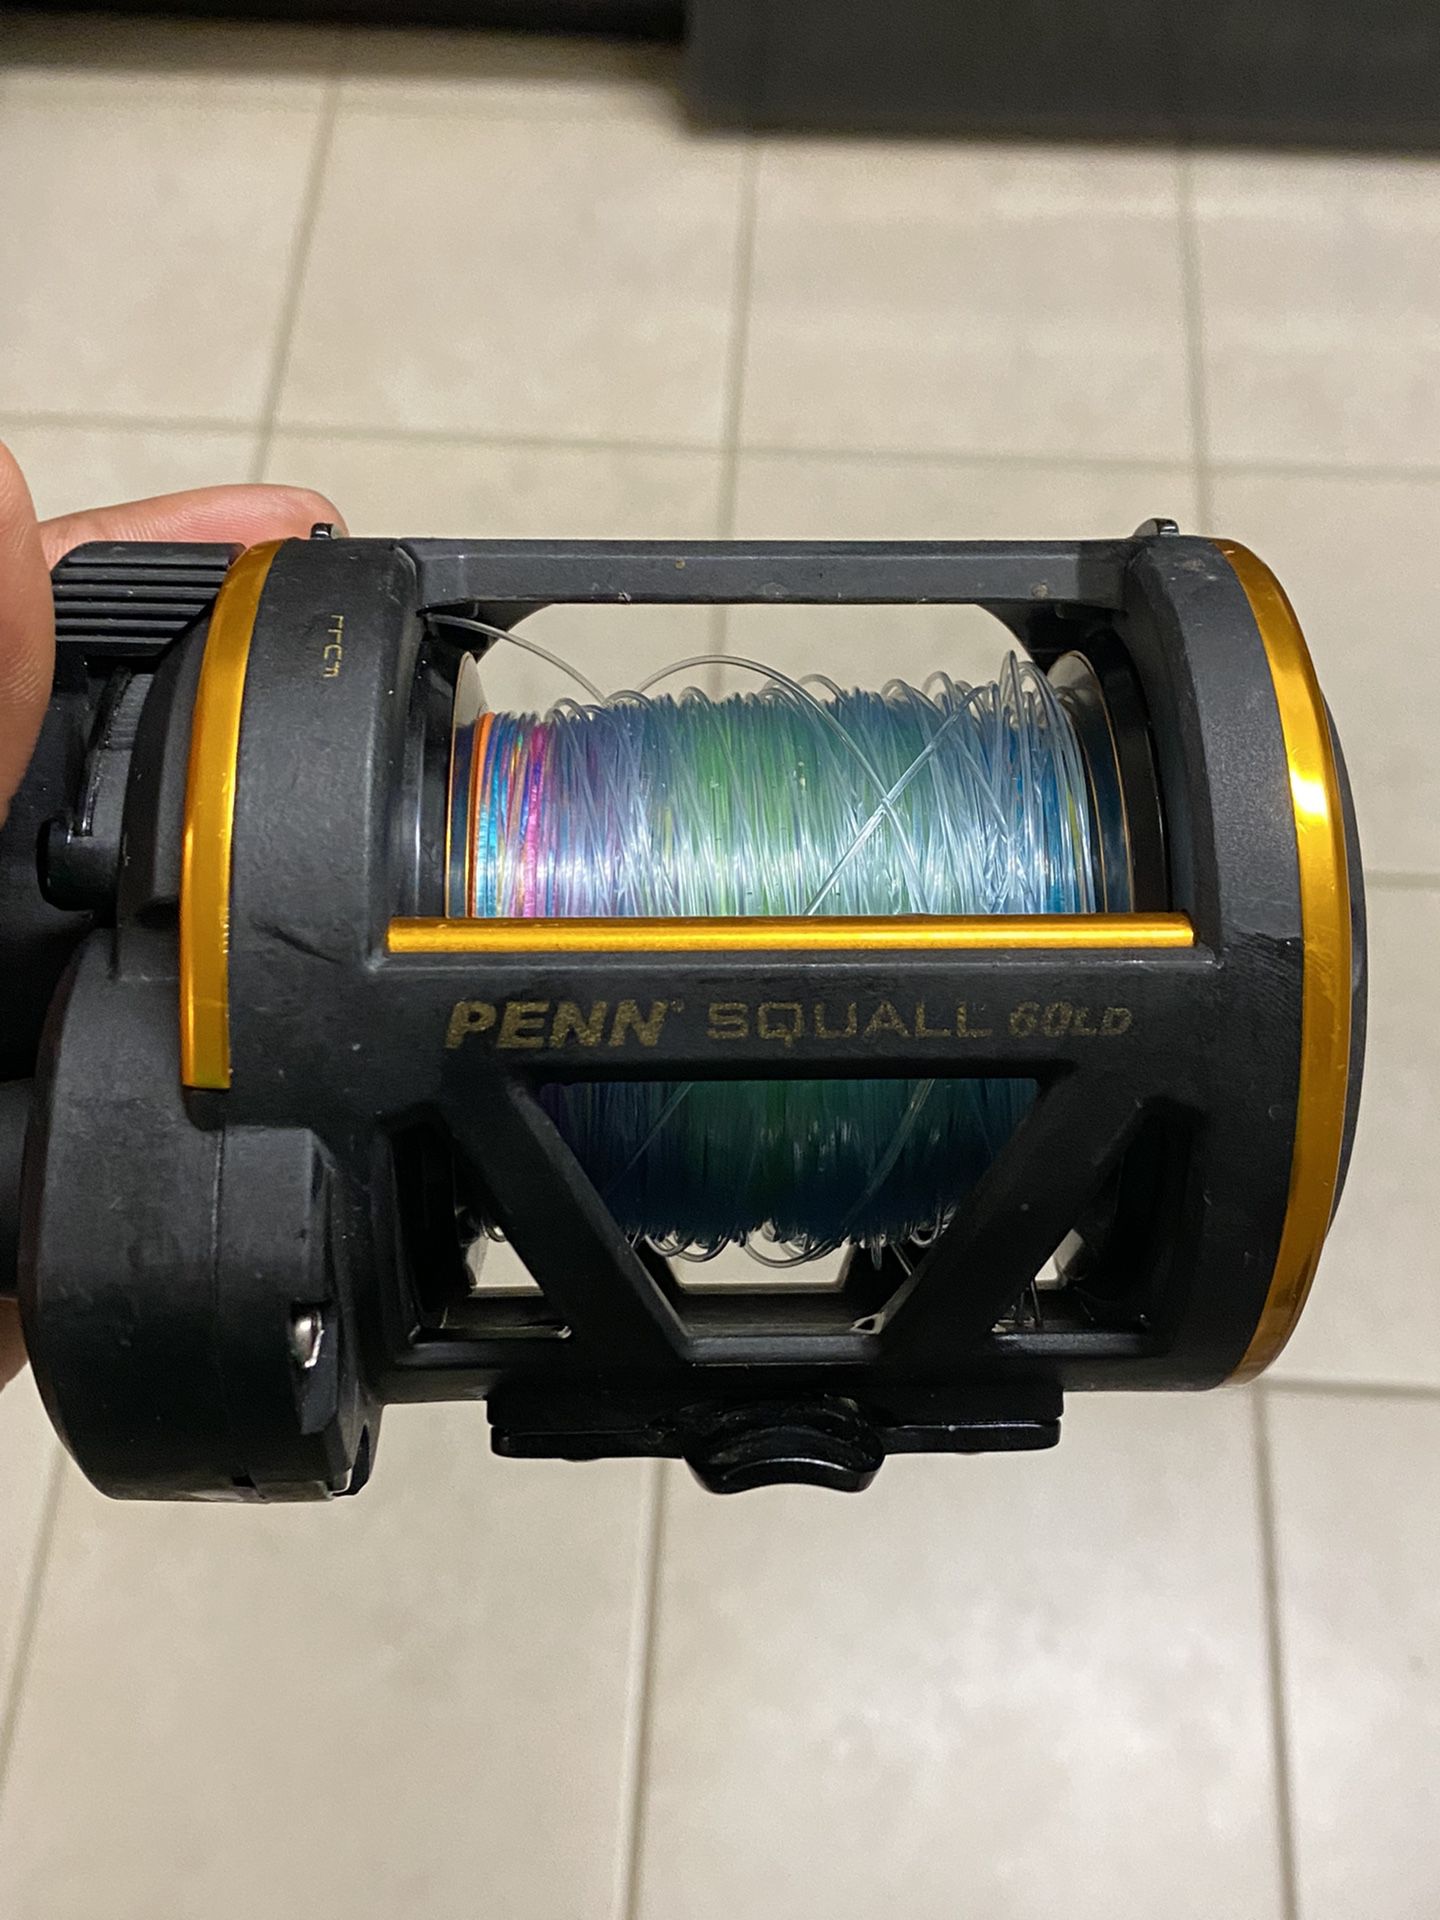 Penn Squall 60LD Squall Lever Drag Reel for Sale in Lake Worth, FL - OfferUp